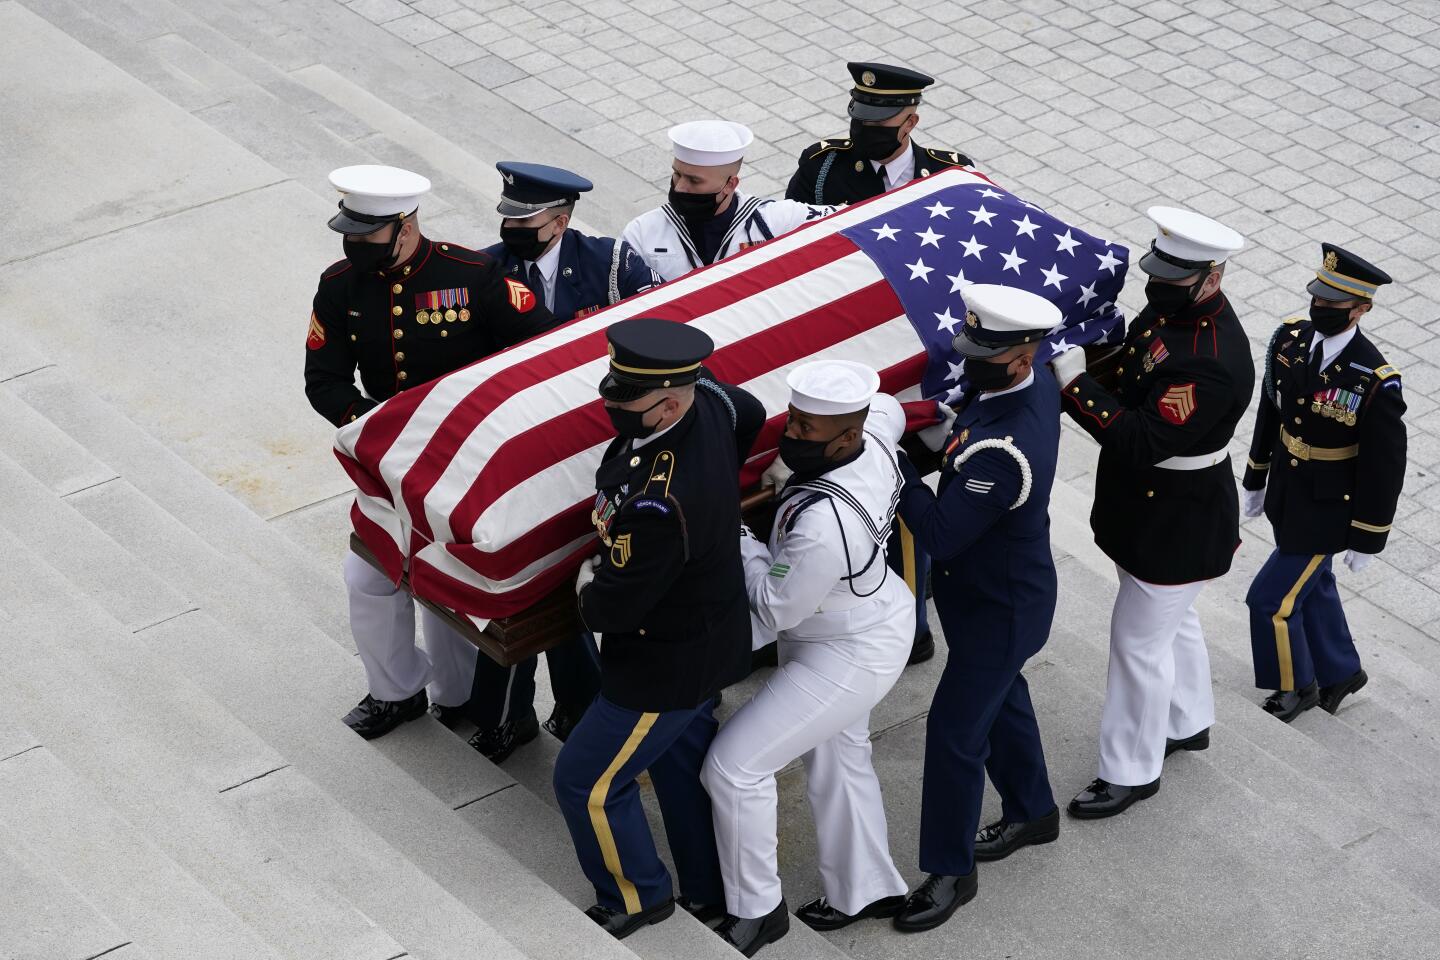 A military honor guard carries the flag-draped casket of Justice Ruth Bader Ginsburg to lie in state at the U.S. Capitol.